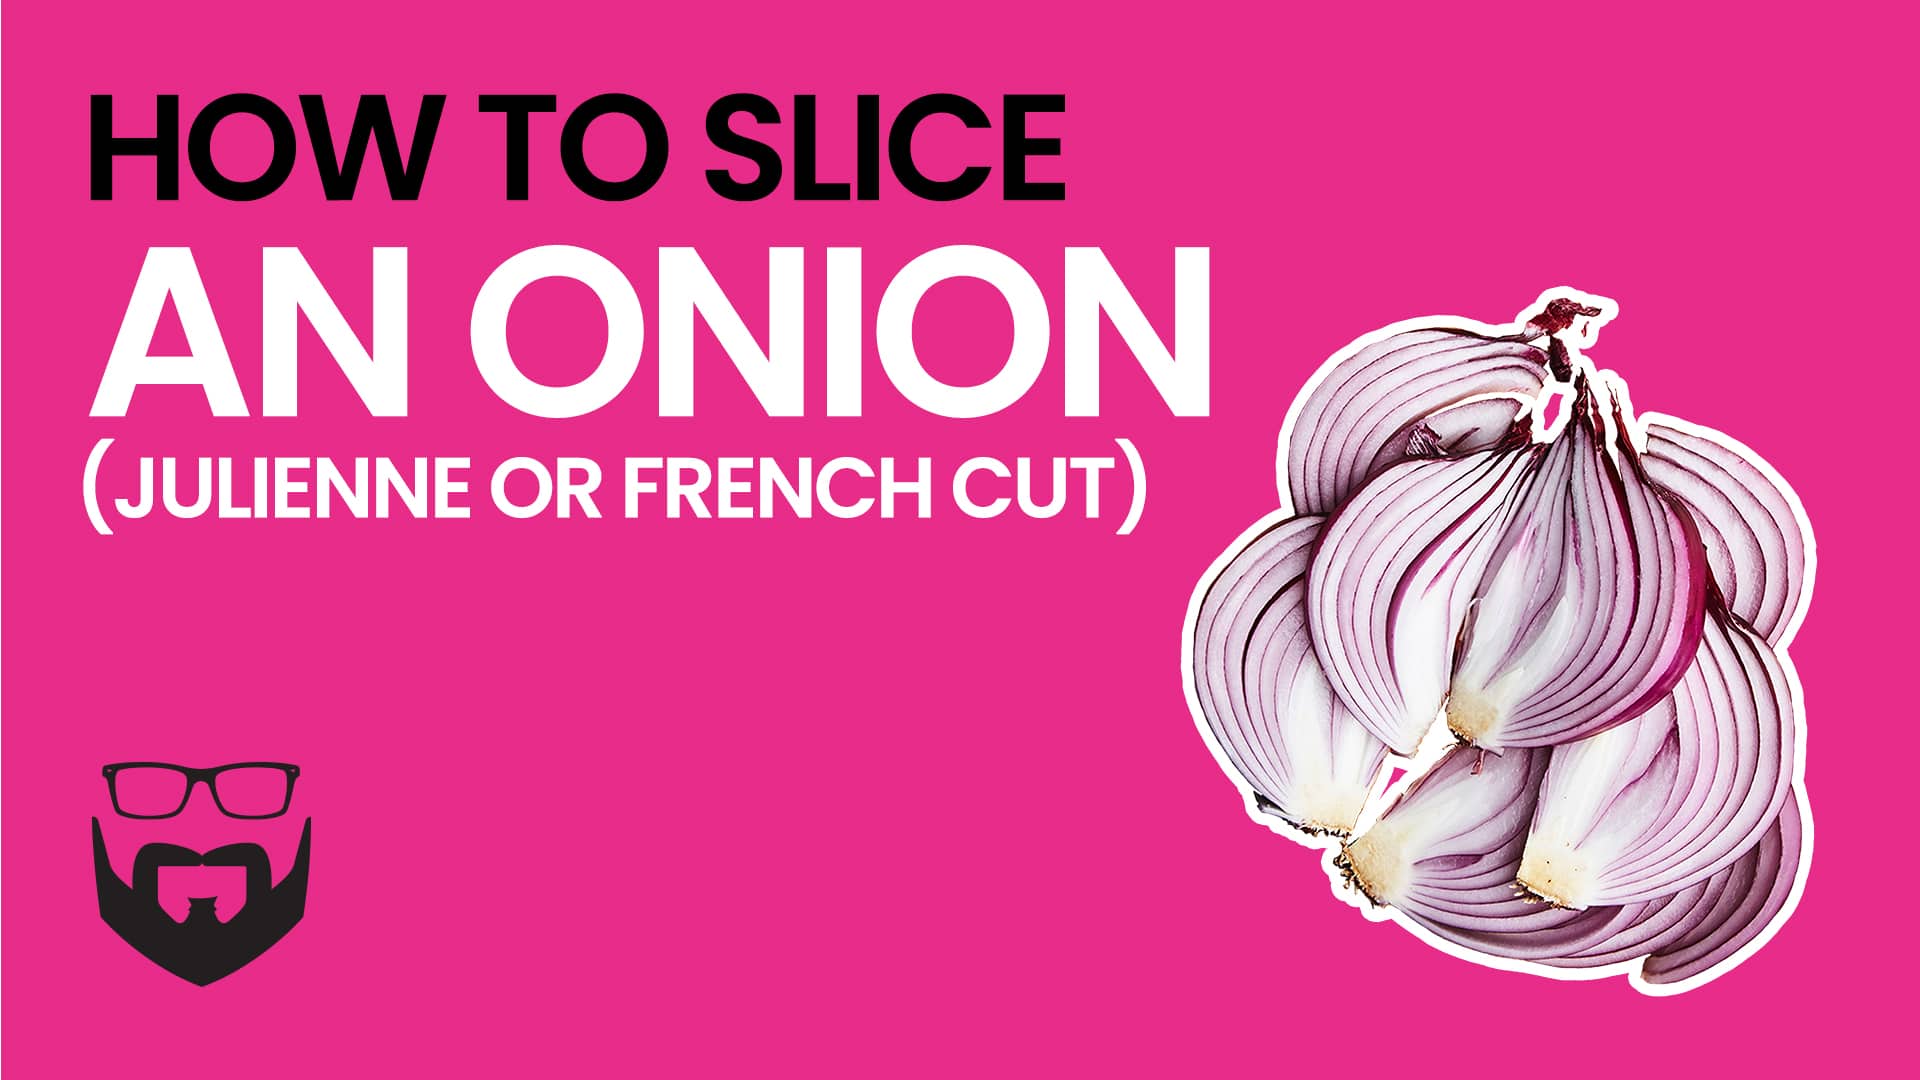 How to Slice an Onion (Julinne or French Cut) Video - Pink